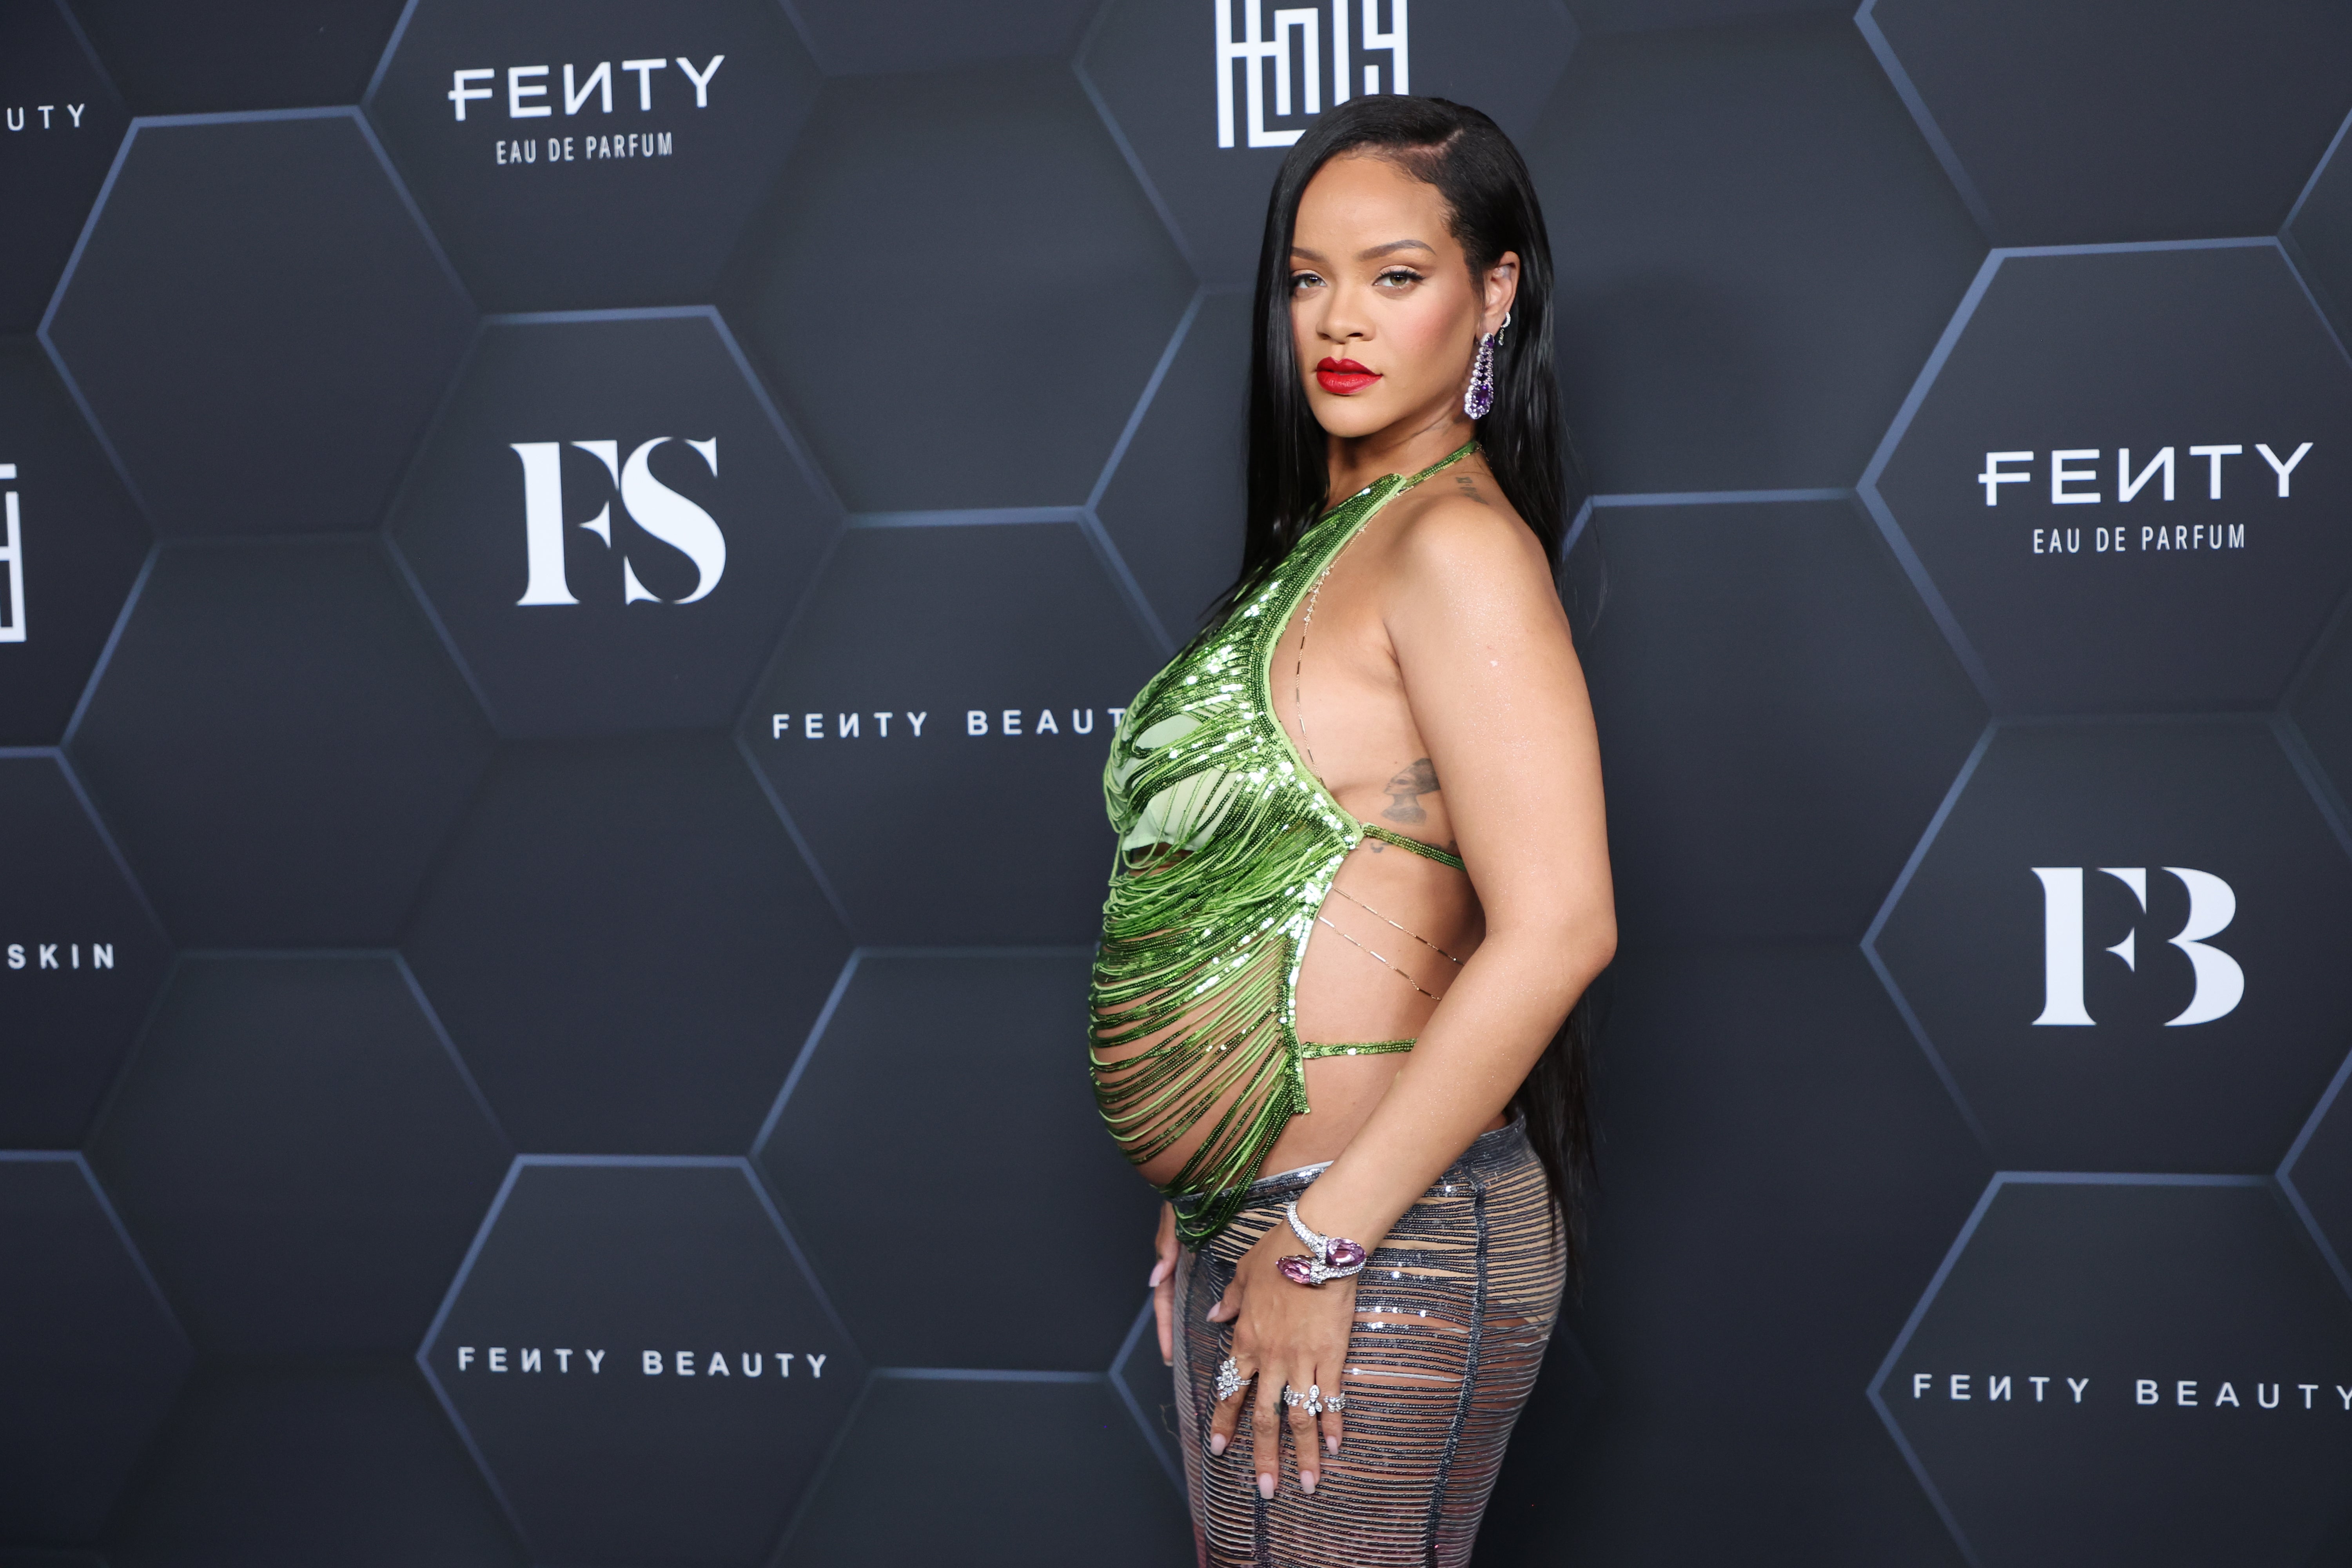 Since revealing her first pregnancy at the end of January, Rihanna has been making headlines worldwide for her maternity style